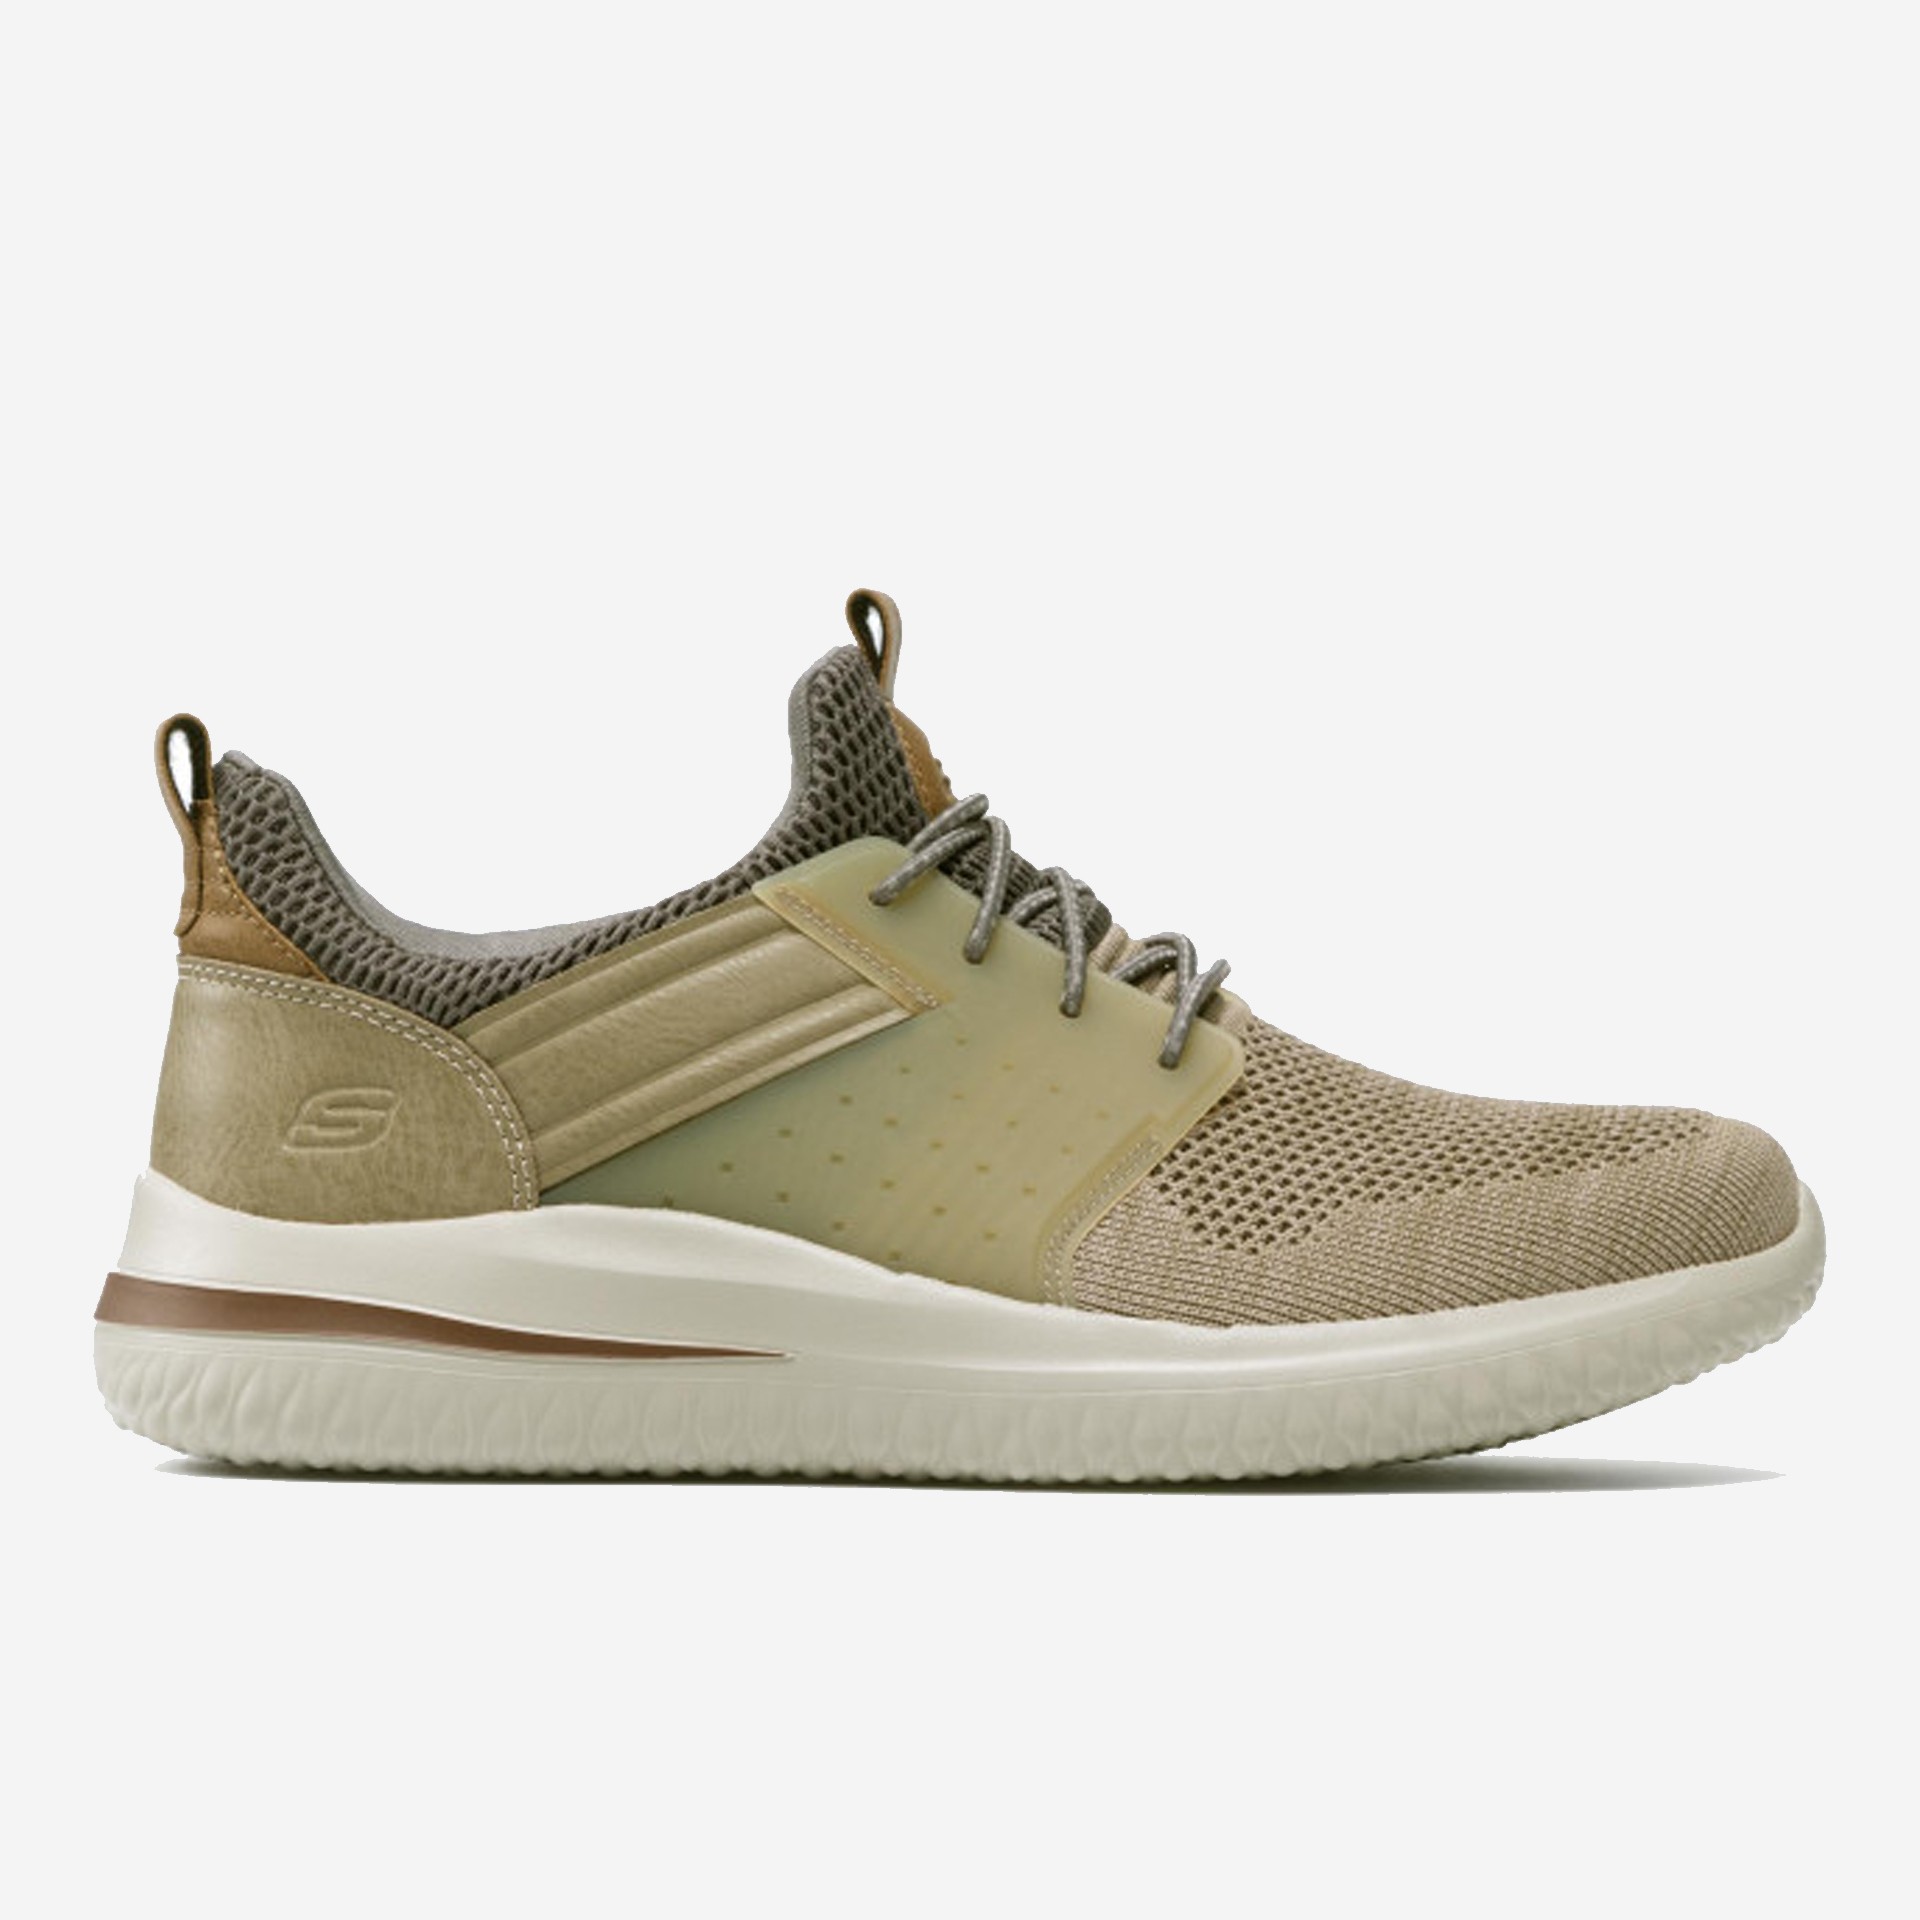 SKECHERS DELSON CICADA TAUPE